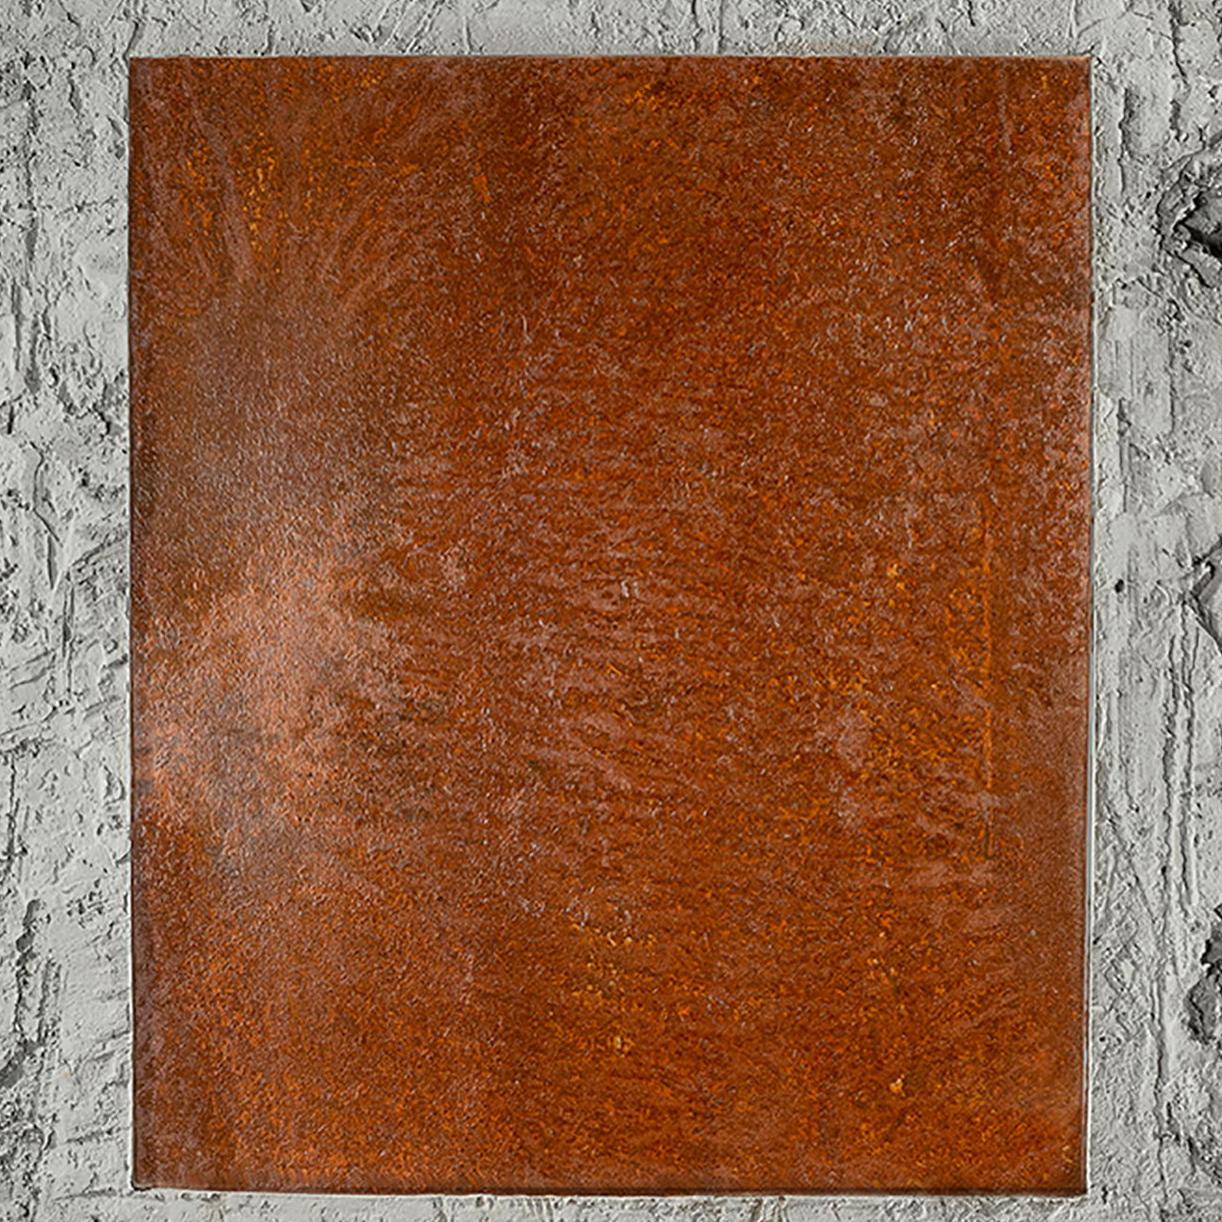 Cement and corroded steel on foam panels.

Auville works with construction cement. Applying techniques used in the construction and ship building industries, he spreads the cement over high-density foam panels, creating pieces ranging in size from